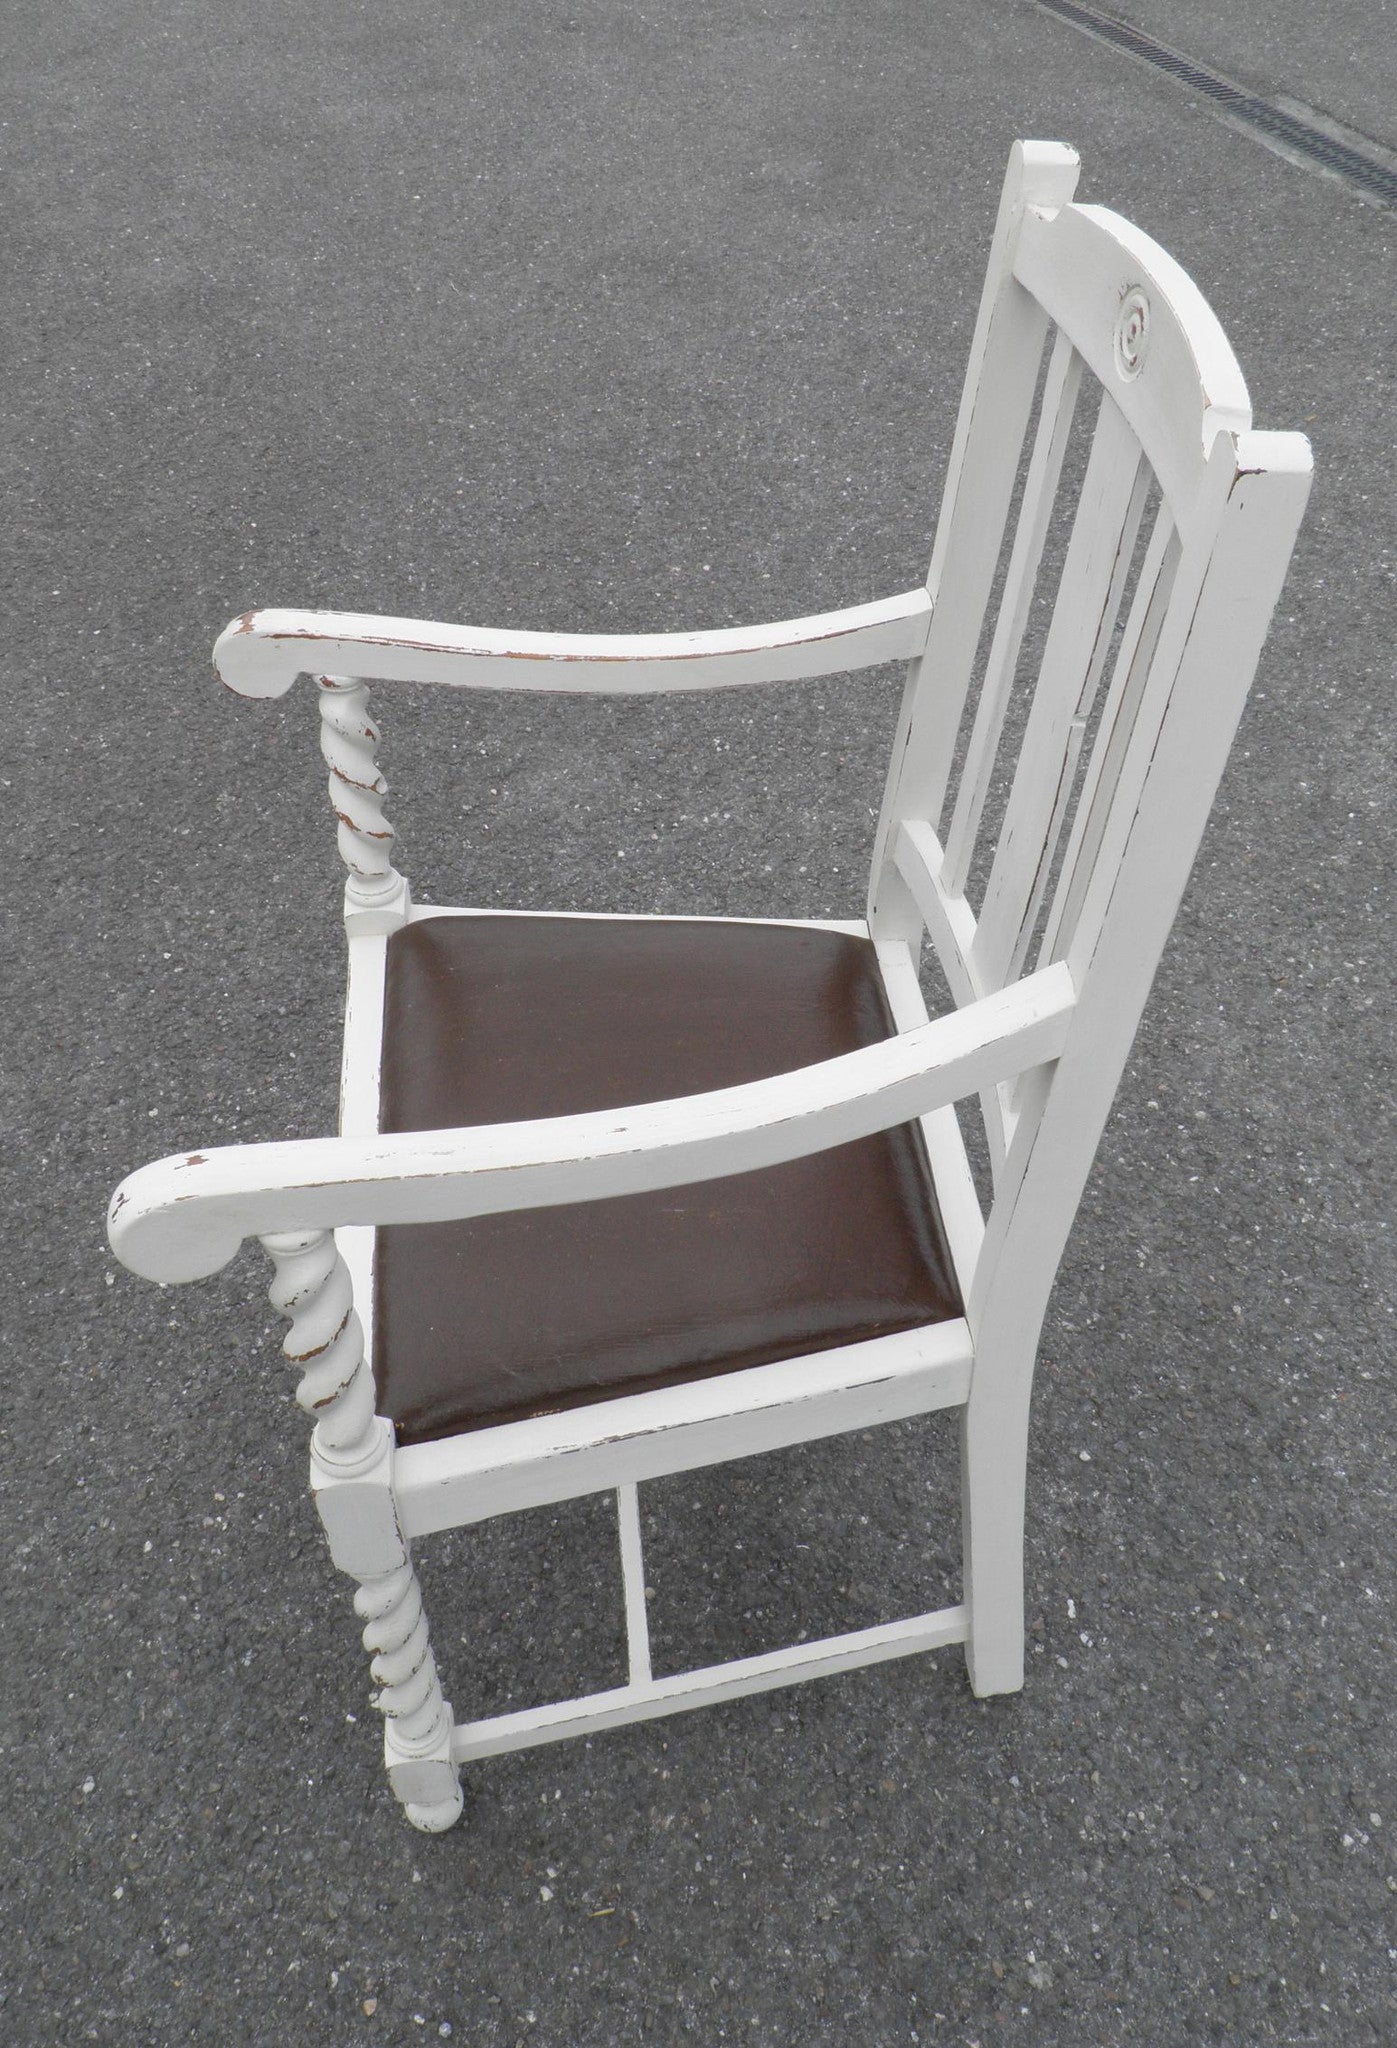 IPPLEPEN INTERIORS : A Pair Of Vintage Carver Chairs. – Ipplepen Interiors